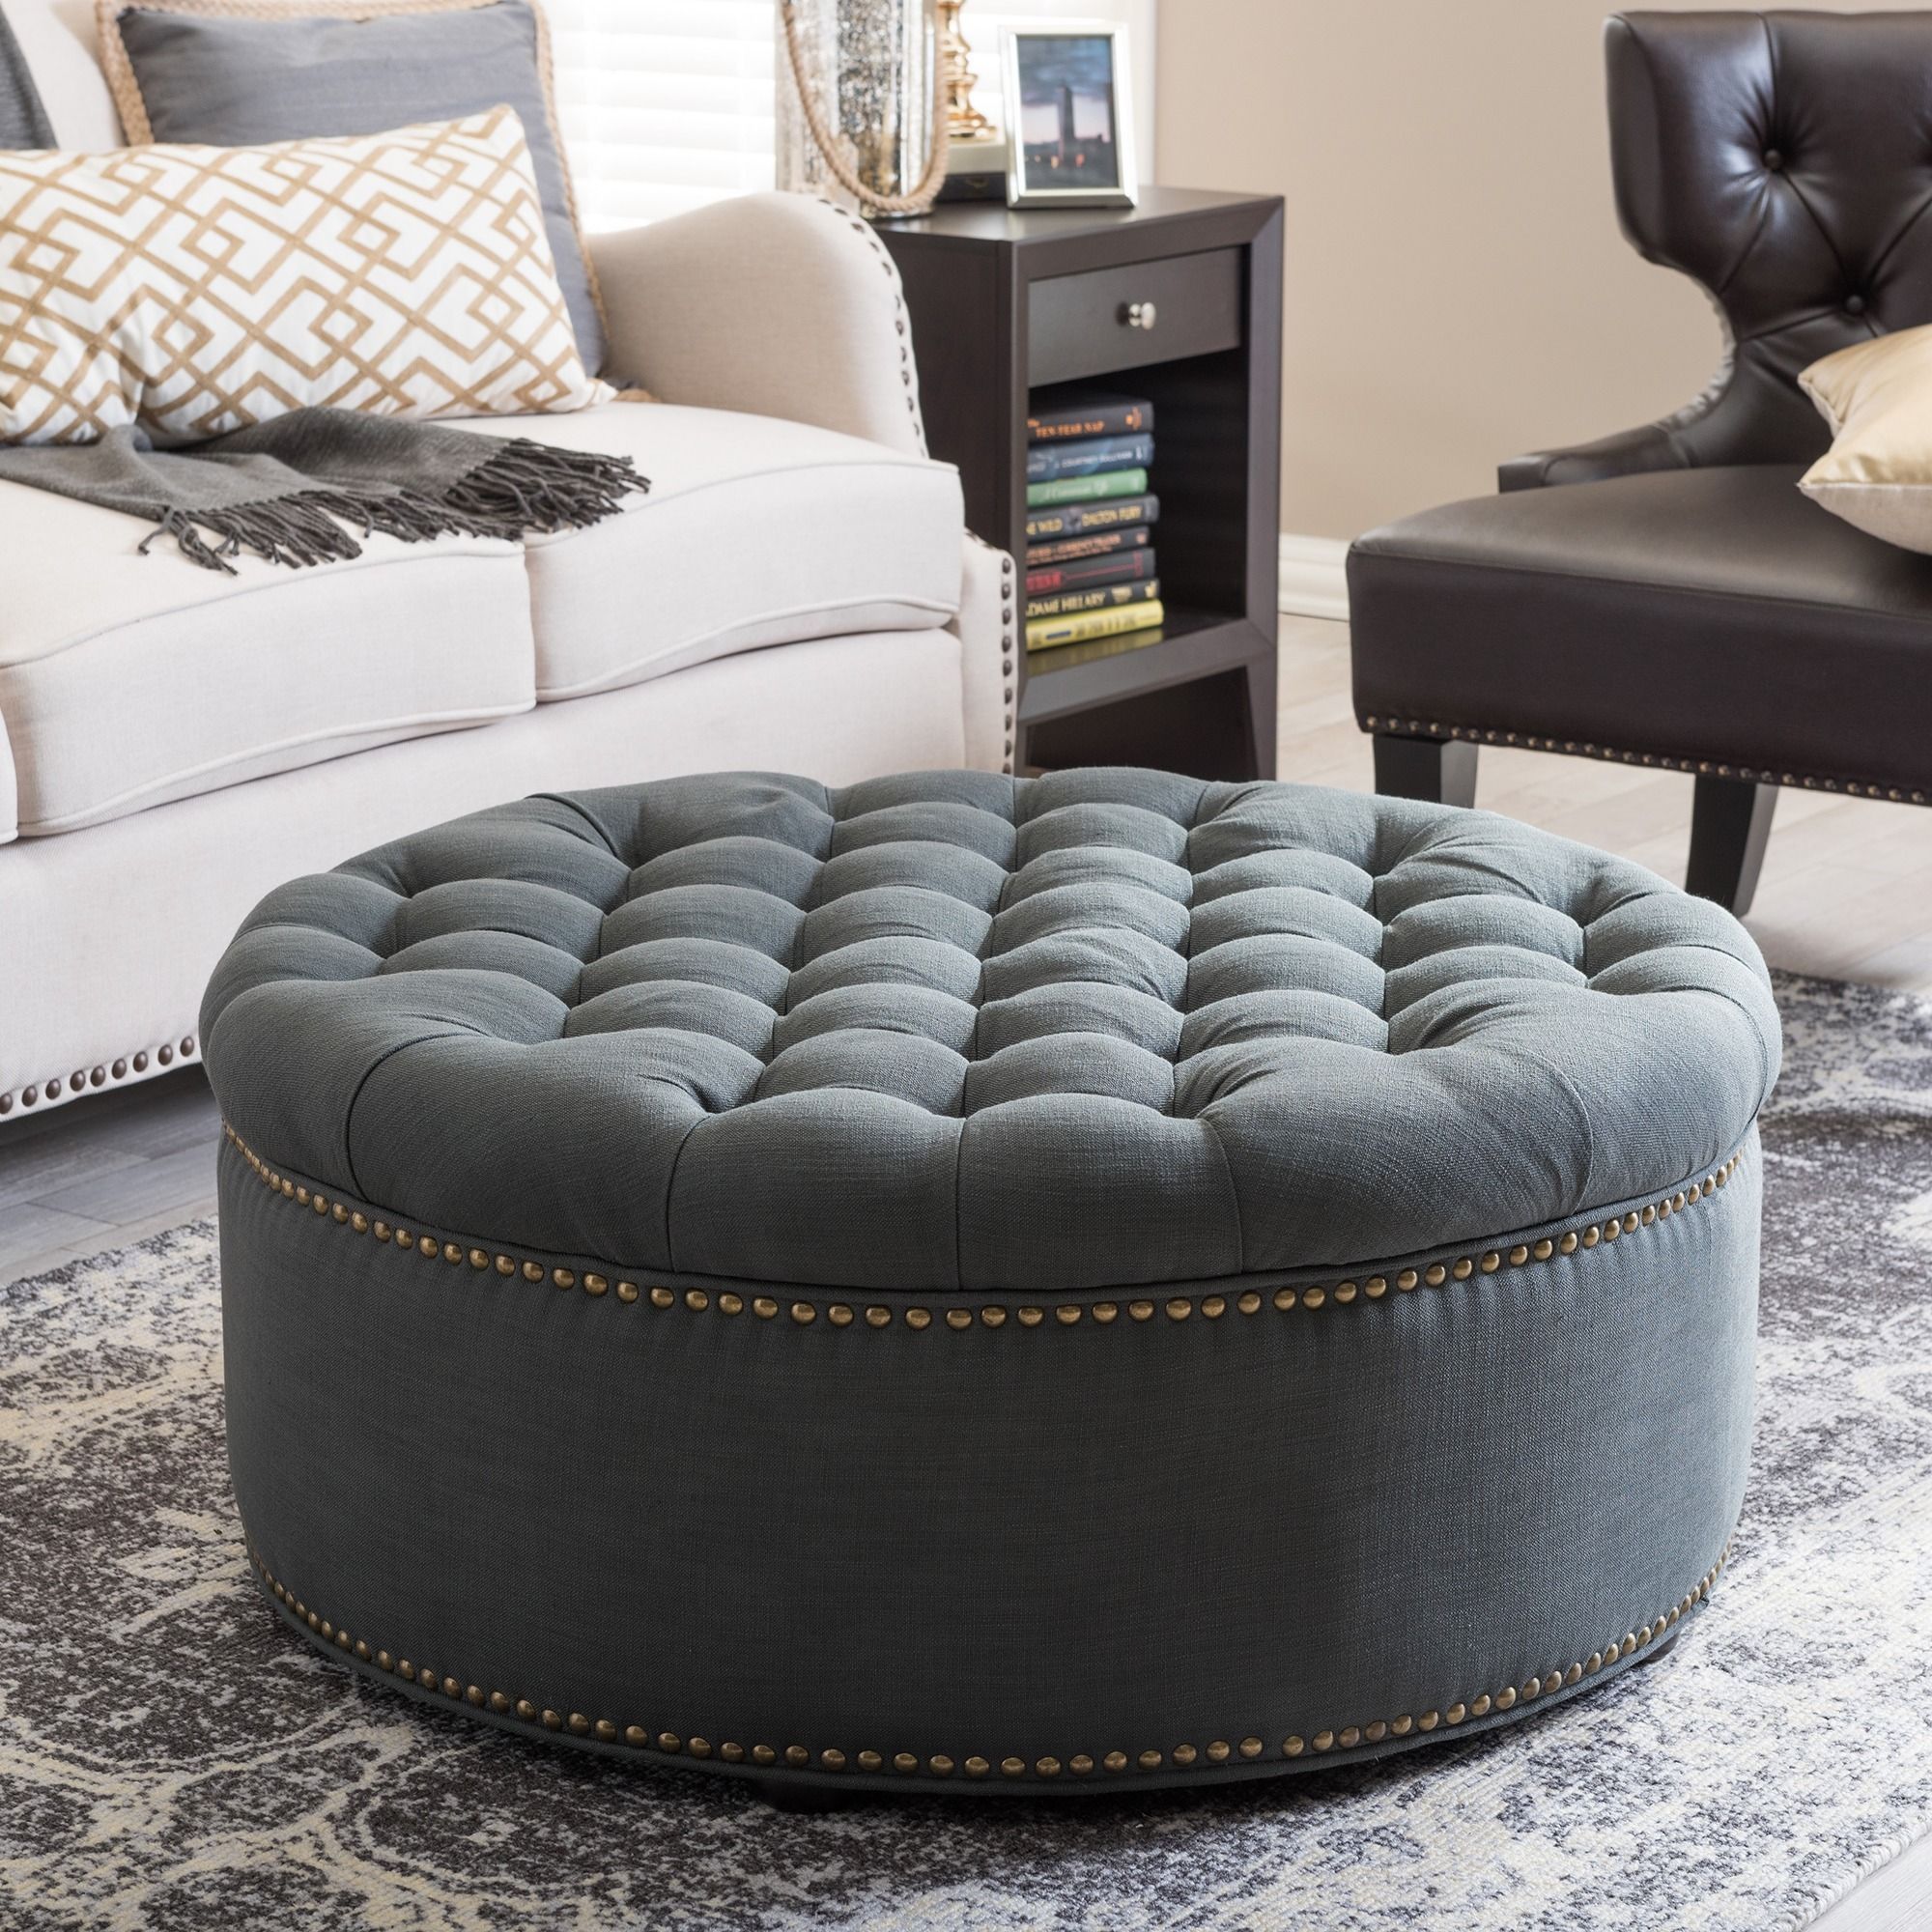 Our Best Living Room Furniture Deals | Tufted Ottoman, Round Storage With Linen Sandstone Tufted Fabric Cocktail Ottomans (View 8 of 20)